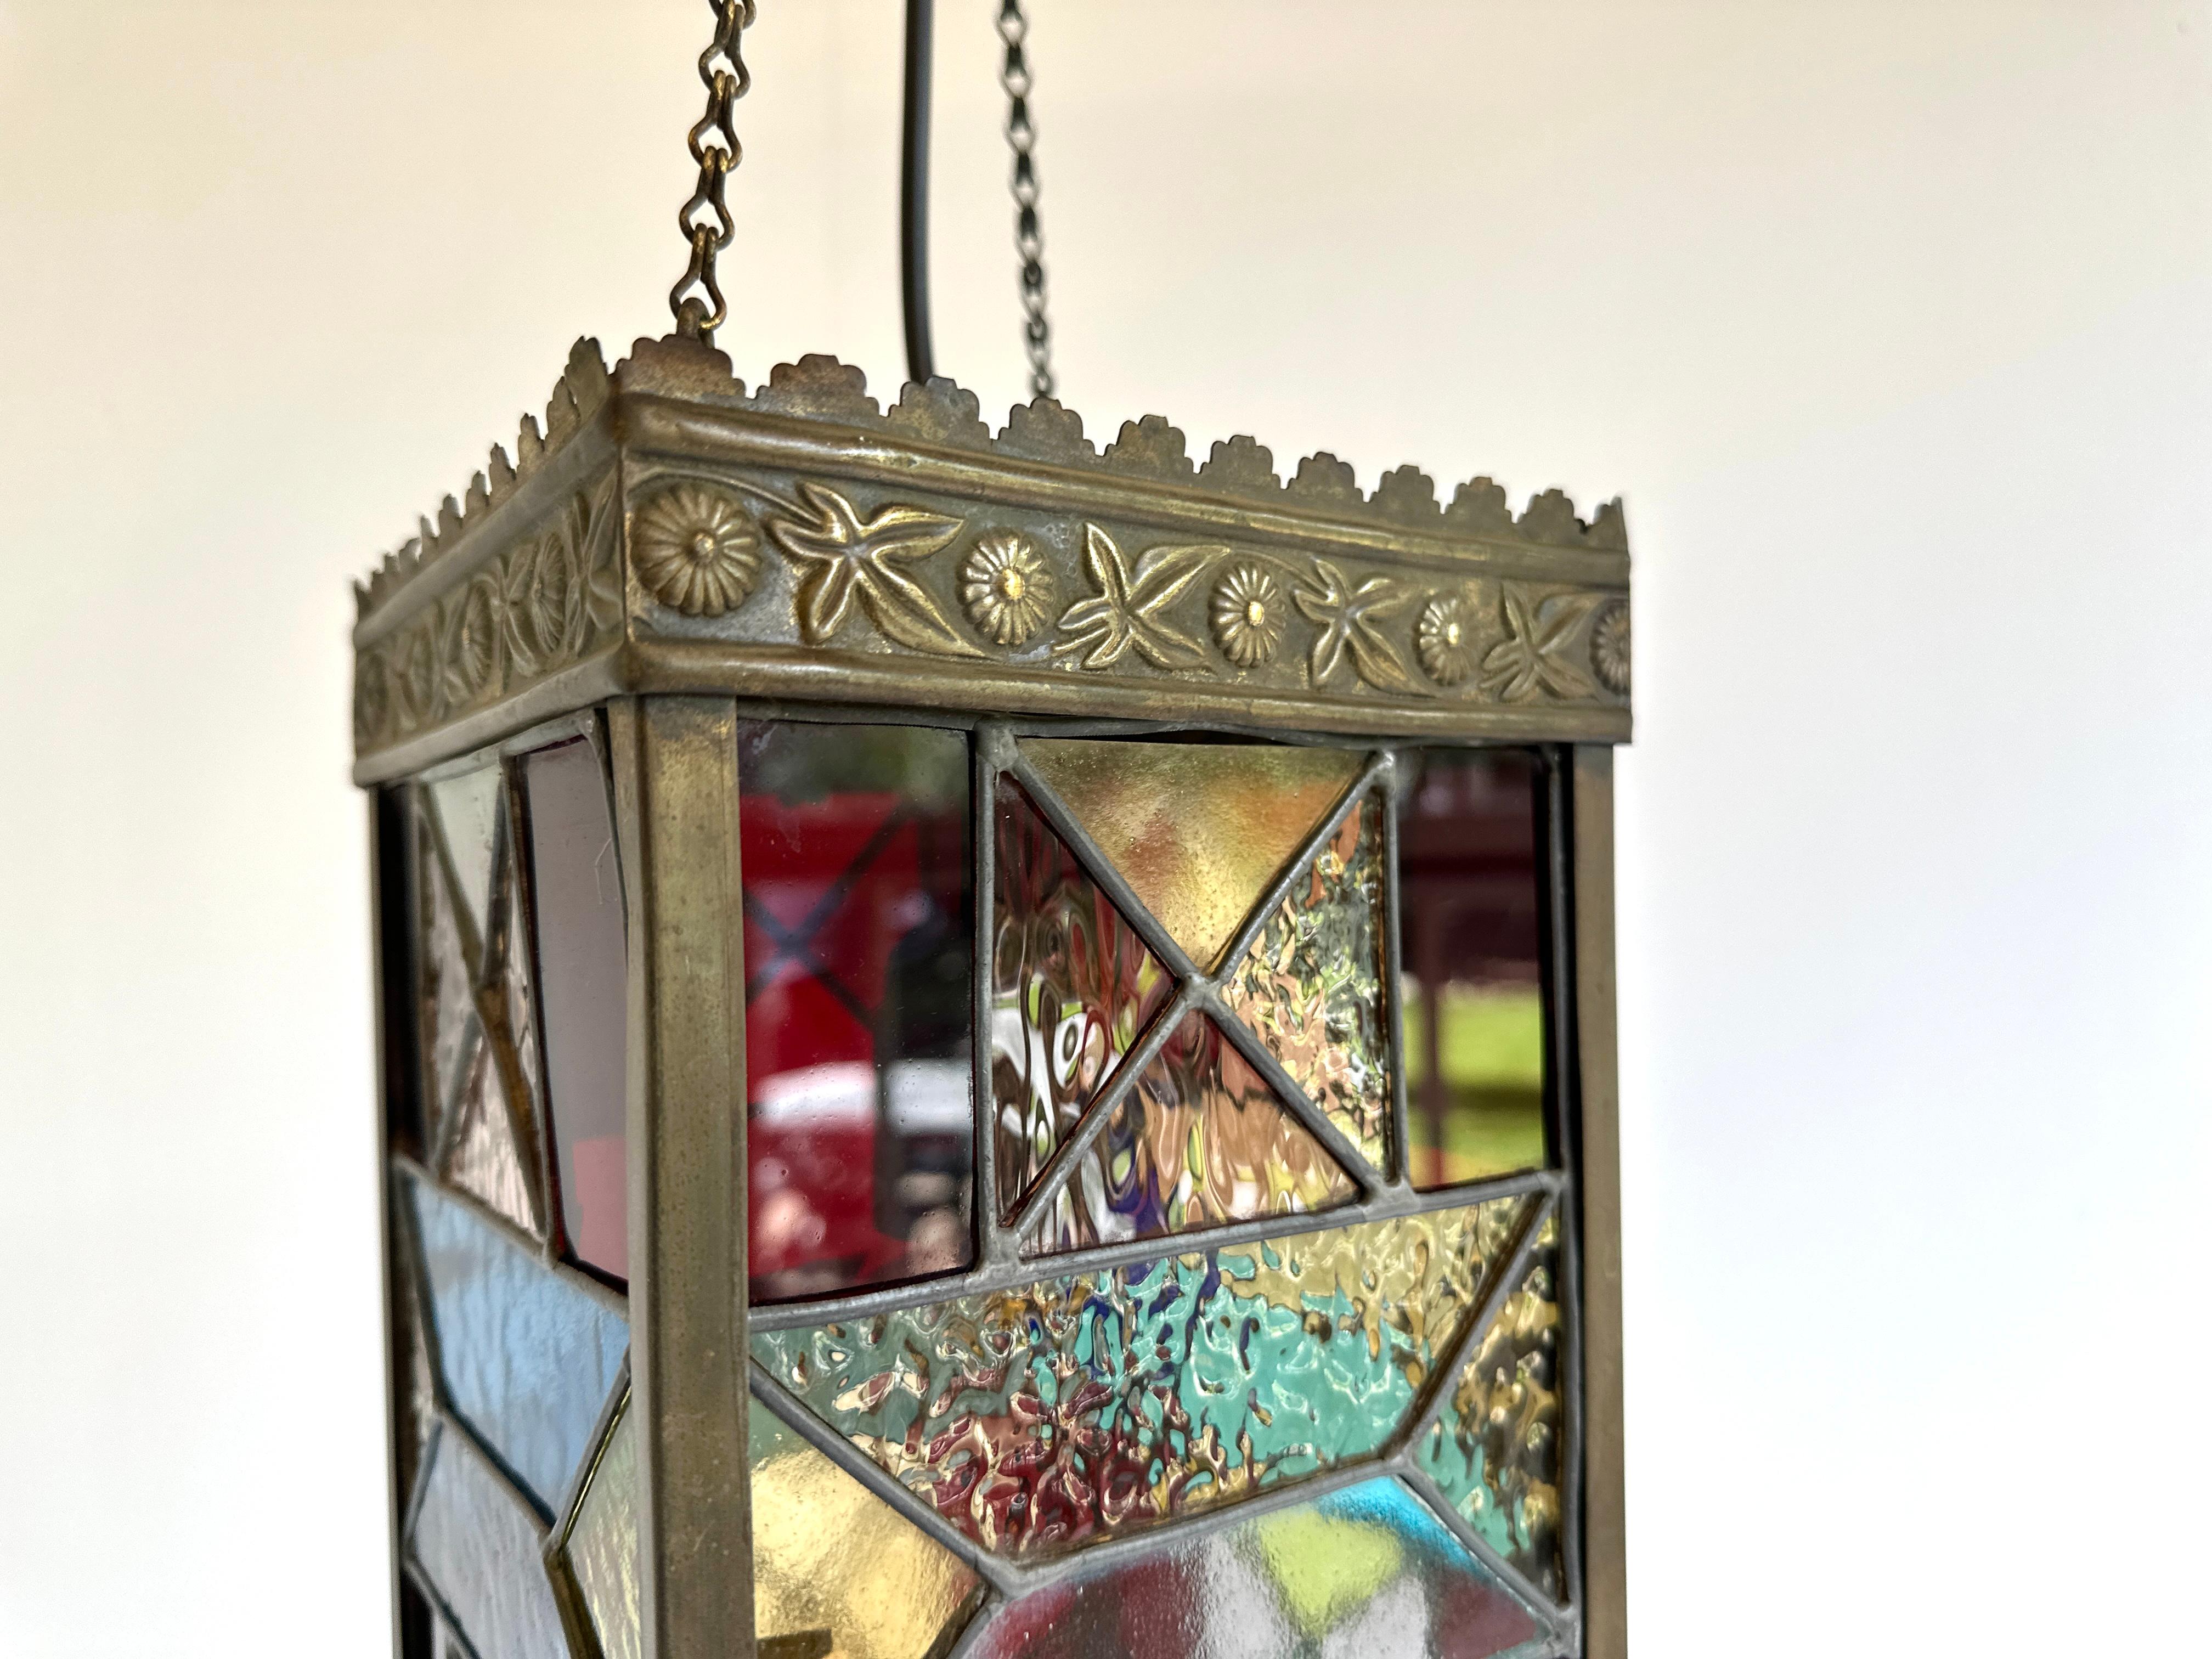 Introducing the strikingly beautiful 1920 Stained Glass Hallway Lantern. This Arts & Crafts style lantern is the perfect addition to any home that appreciates the beauty of handcrafted glass. With brilliant jewel-toned hues and intricate geometric